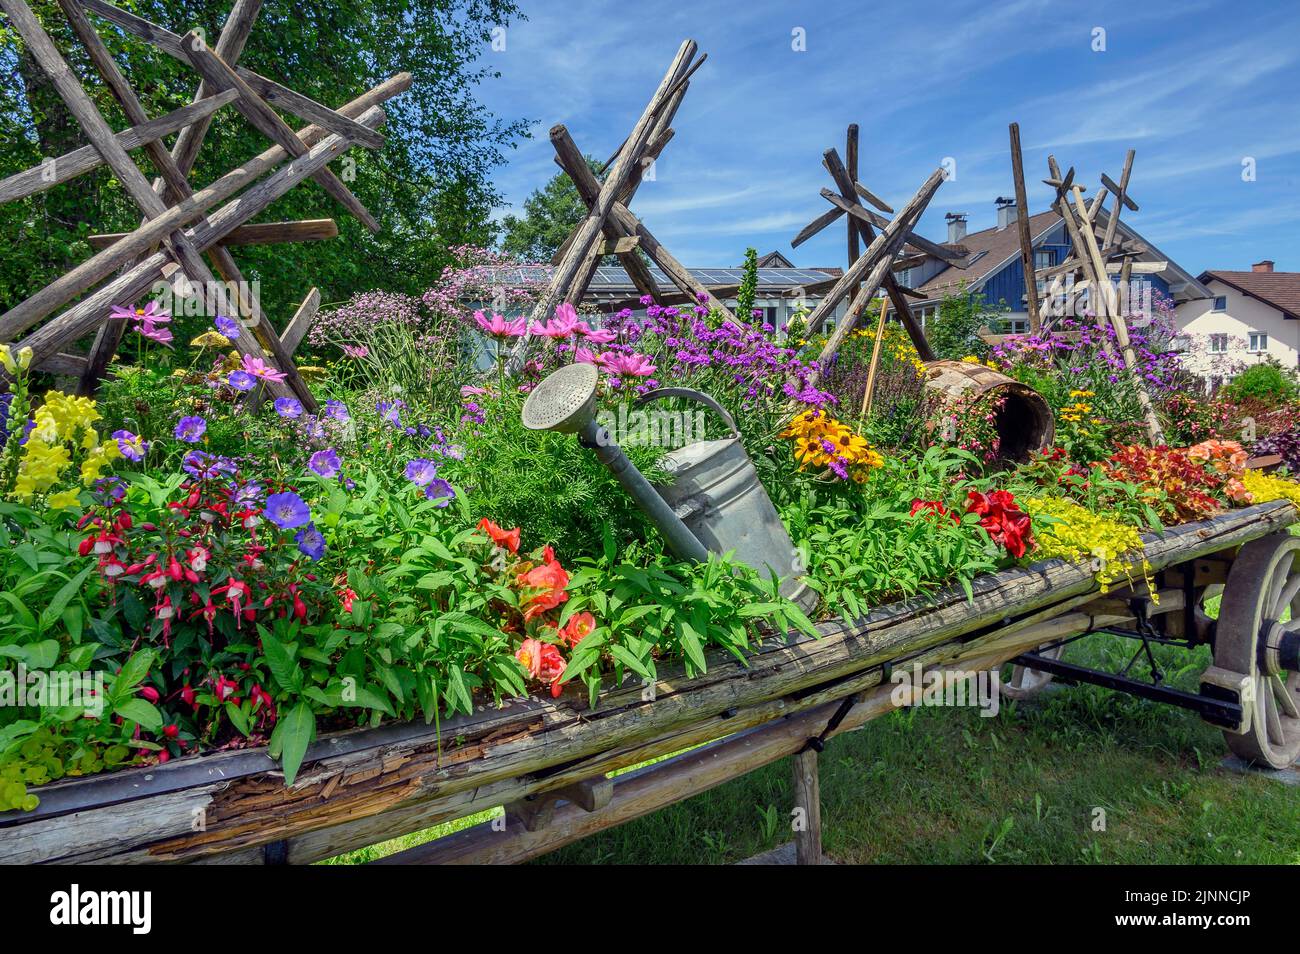 Old hay cart with floral decorations and hay candles, Buchenberg, Bavaria, Germany Stock Photo